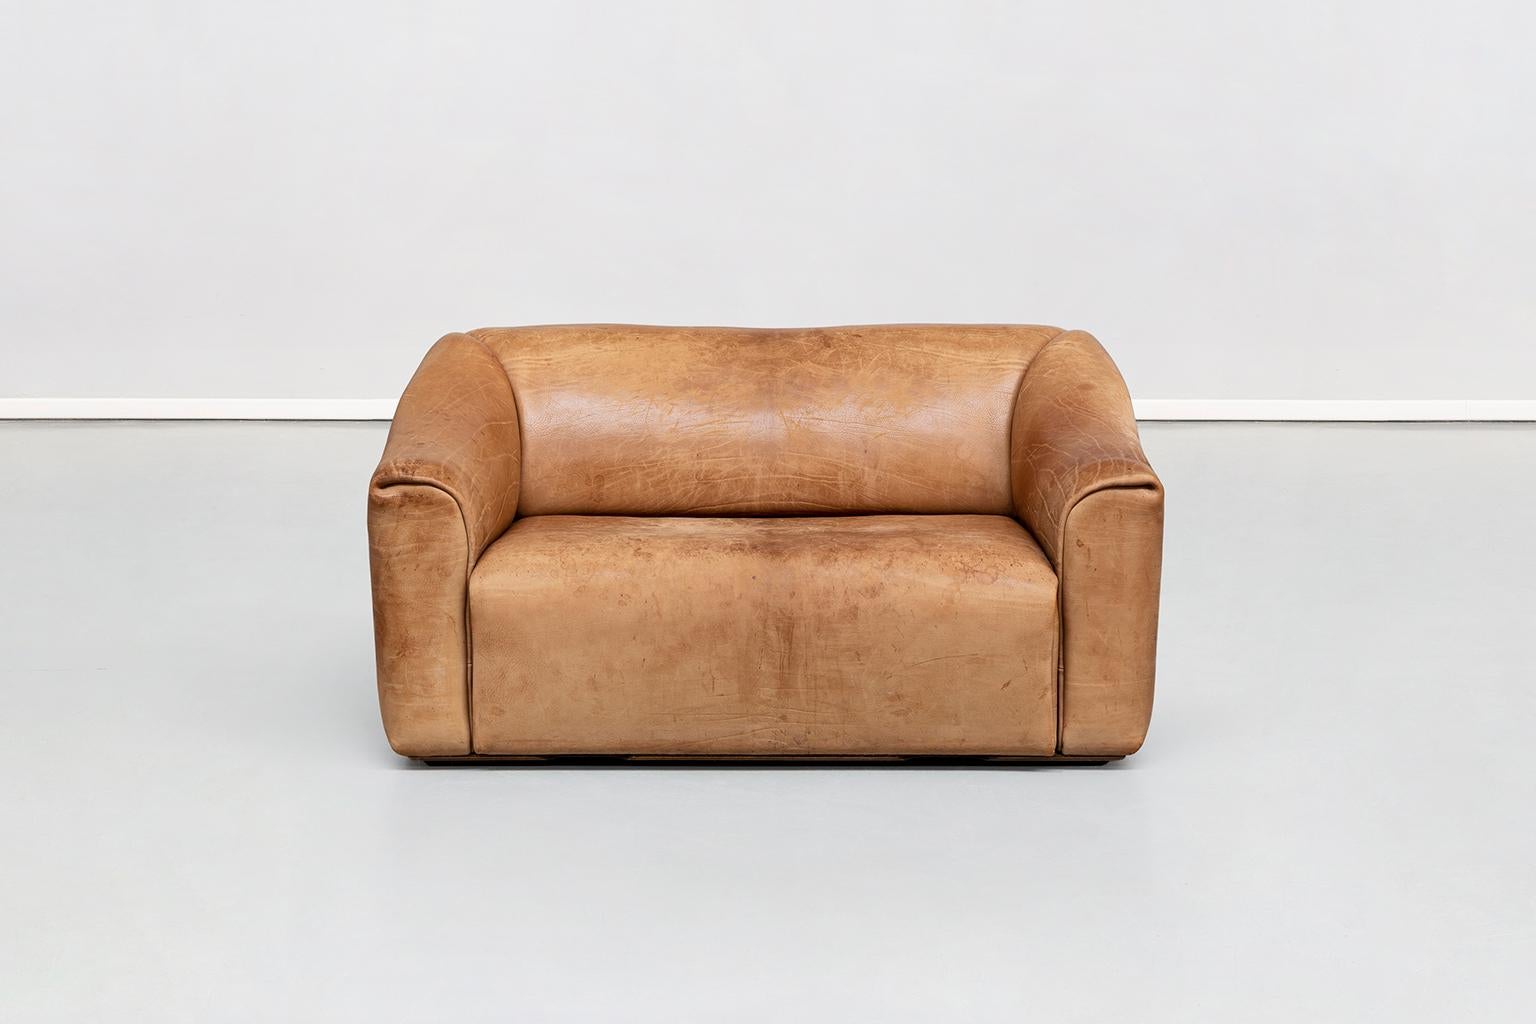 Italian two-seat, buffalo light brown leather sofa, Mod. DS 47 by De Sede, Svizzera, 1970s
A rare and beautiful sofa, produced at the end of the 1970s by De Sede Svizzera, Mod. DS 47 with two seats.
A fantastic vintage condition, beautiful light